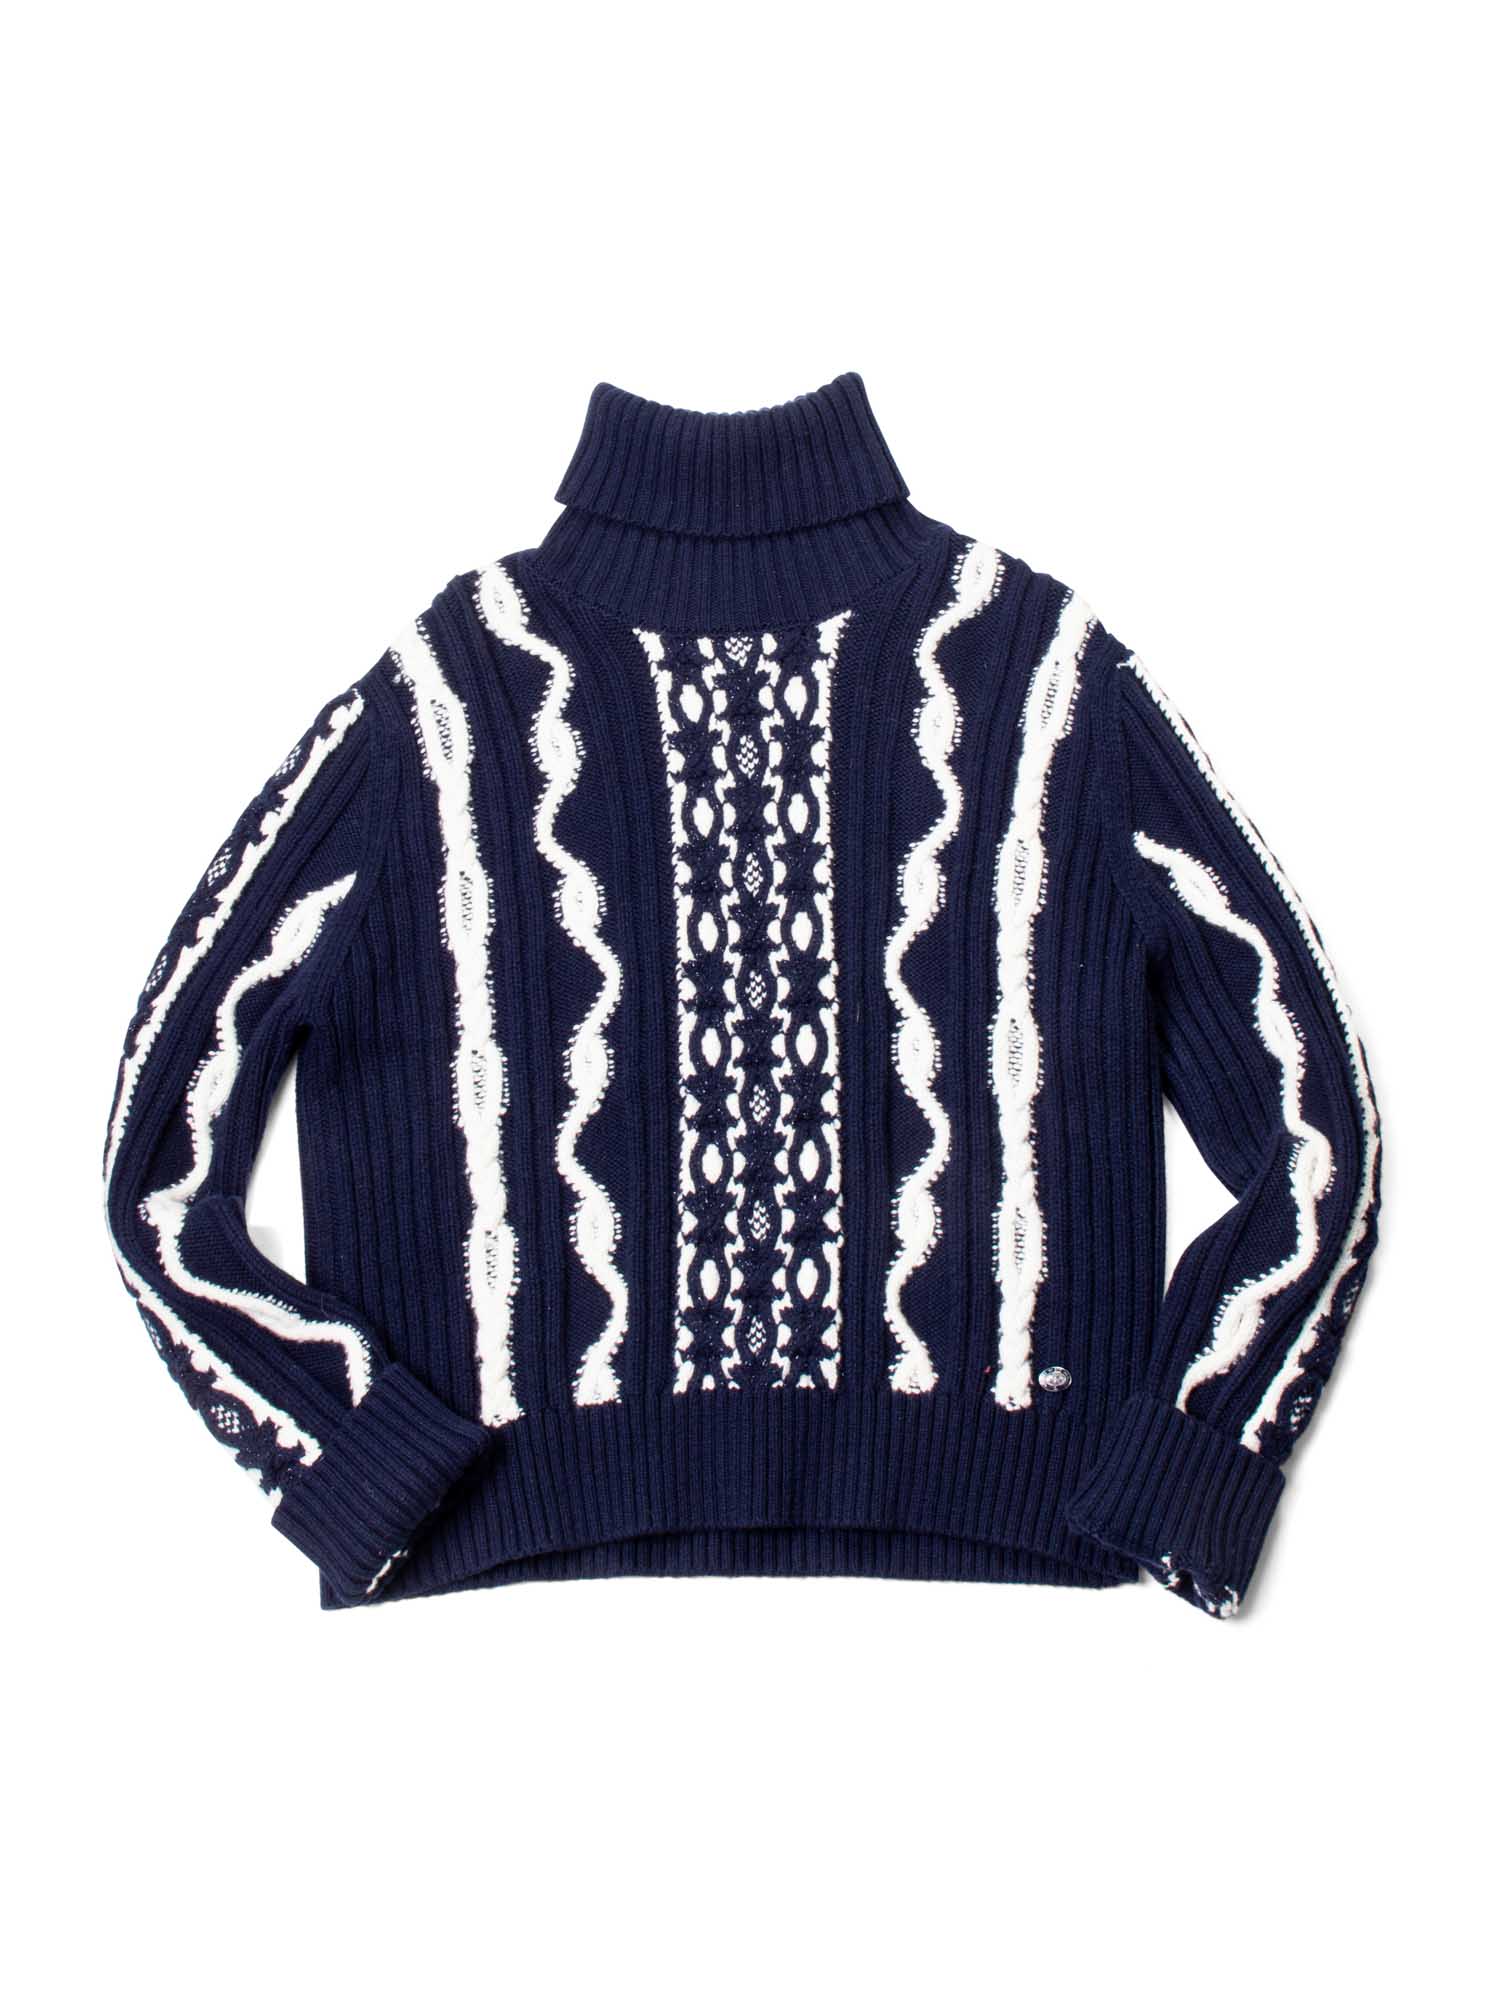 Kenya lancering råb op CHANEL Cable Knit Cashmere Sparkly Nautical Sweater Blue White